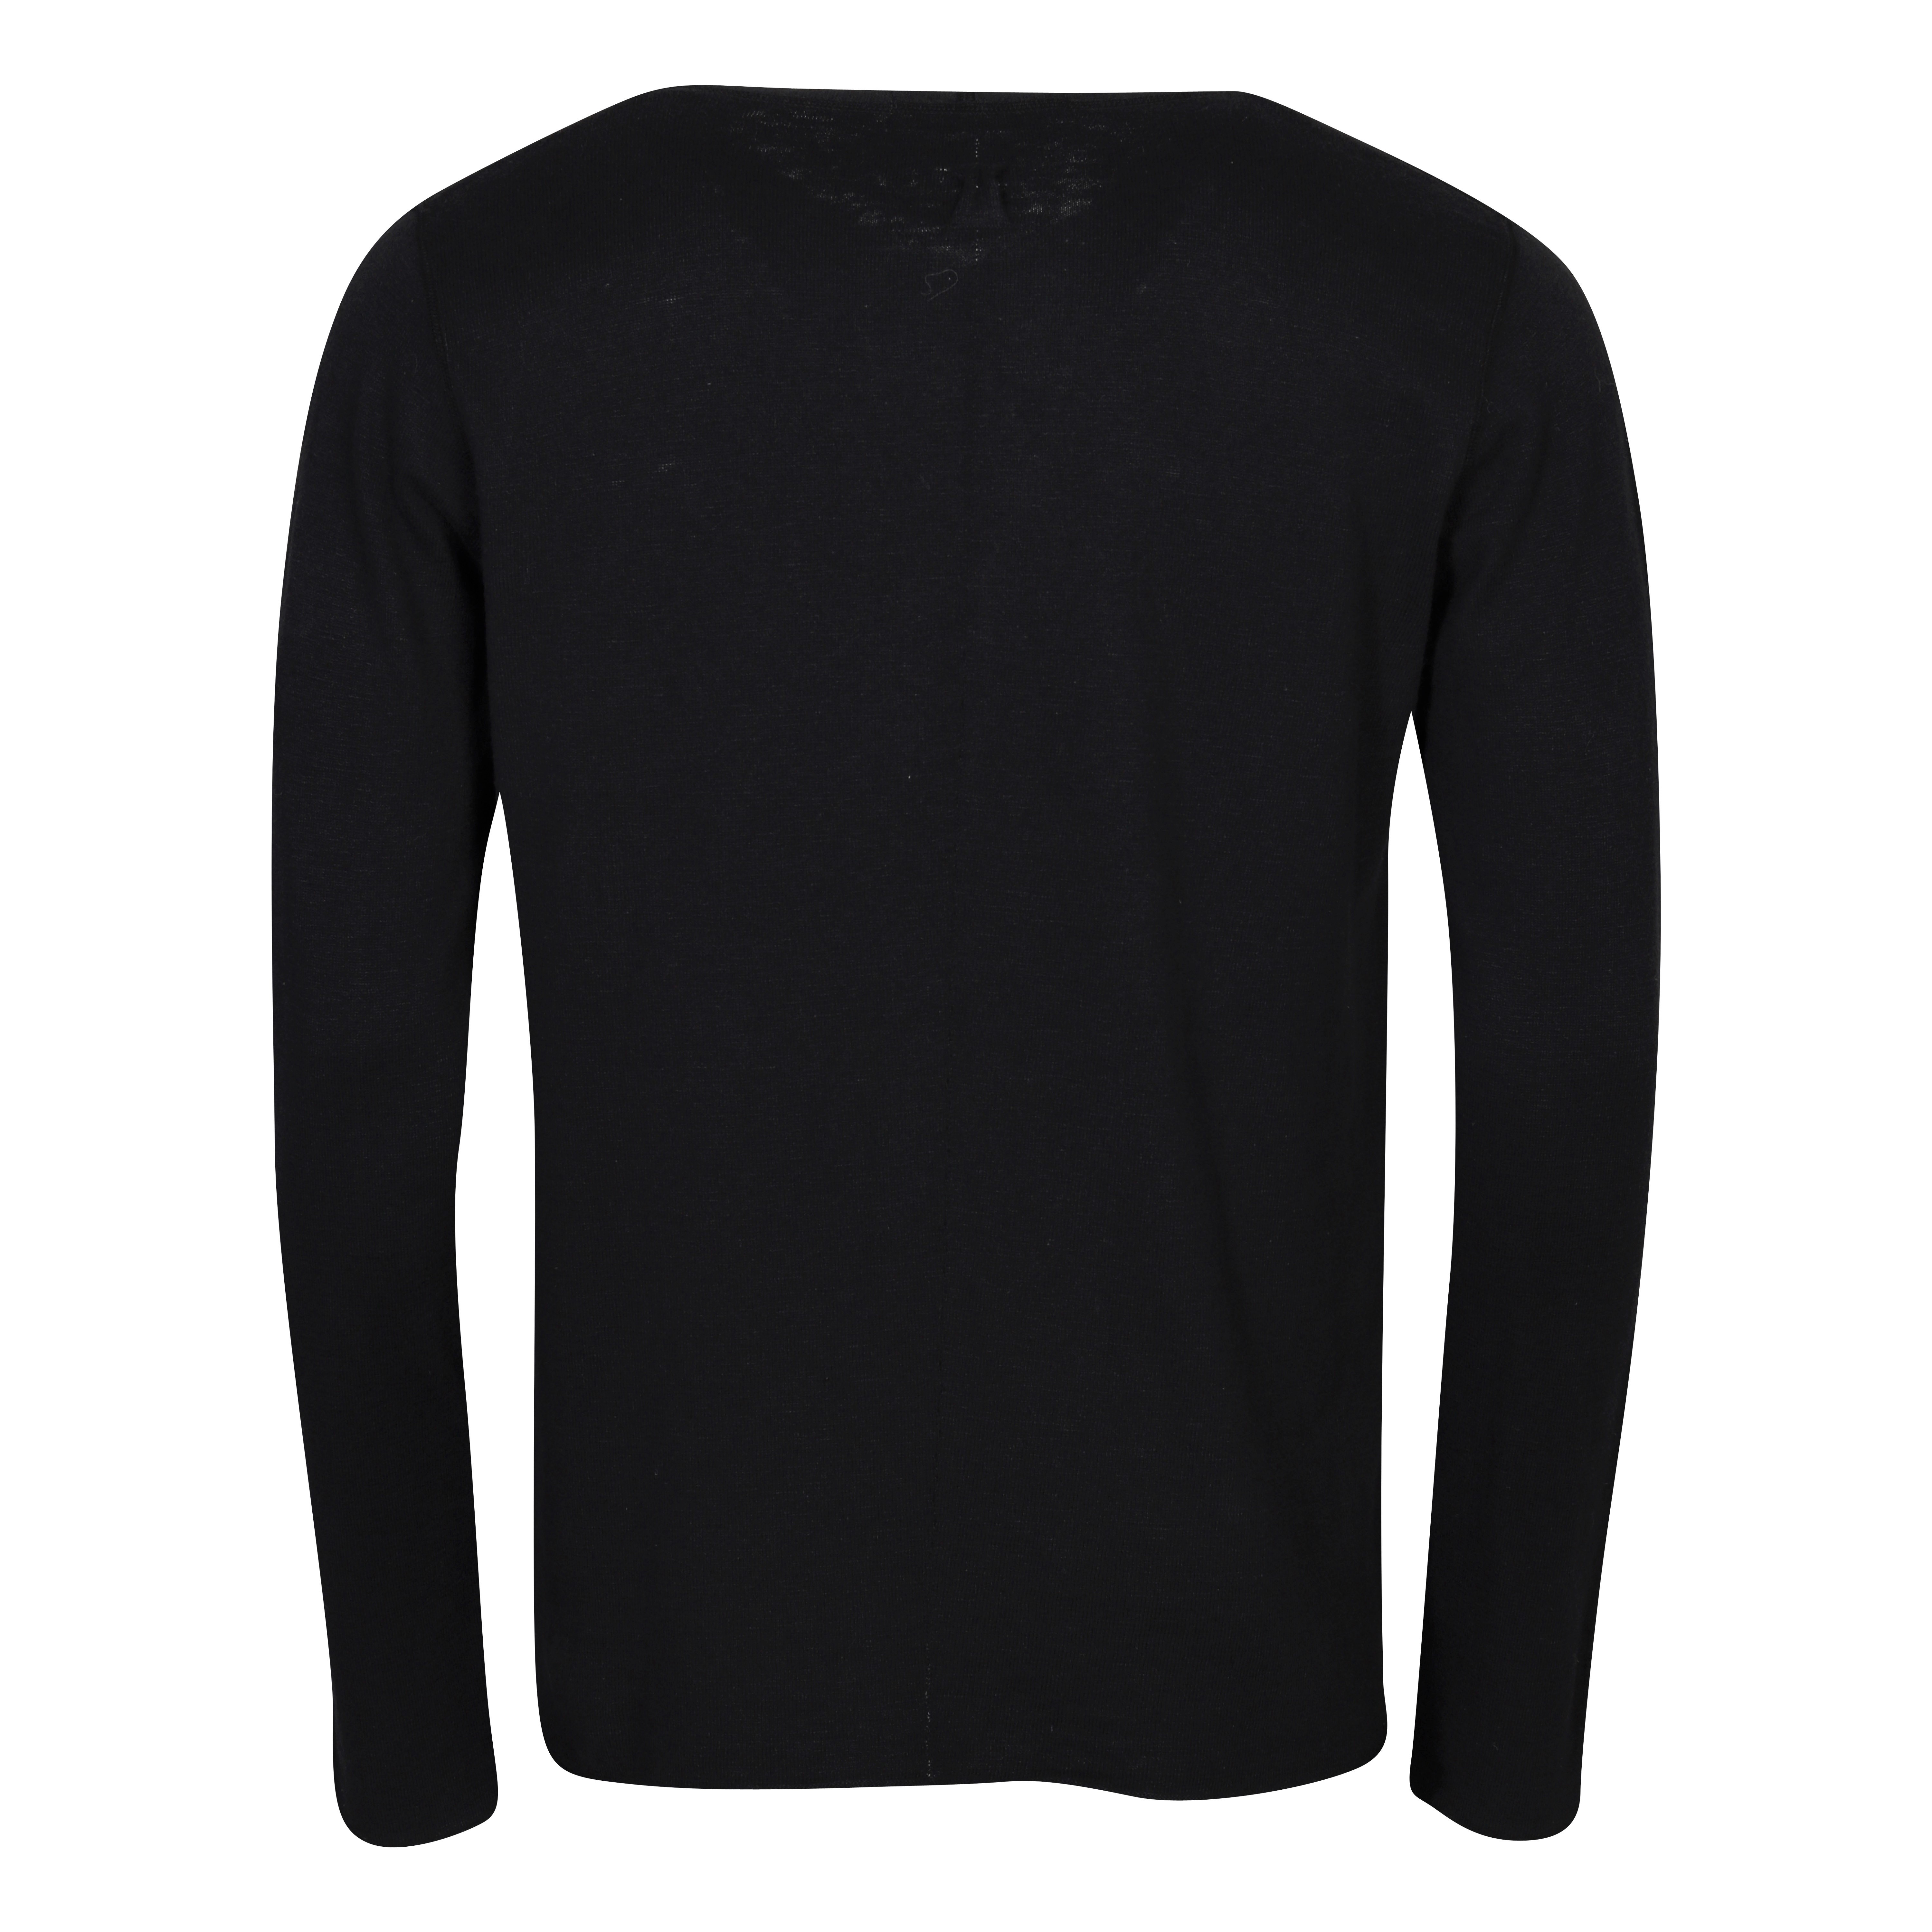 Hannes Roether V-Neck Knit Sweater in Black